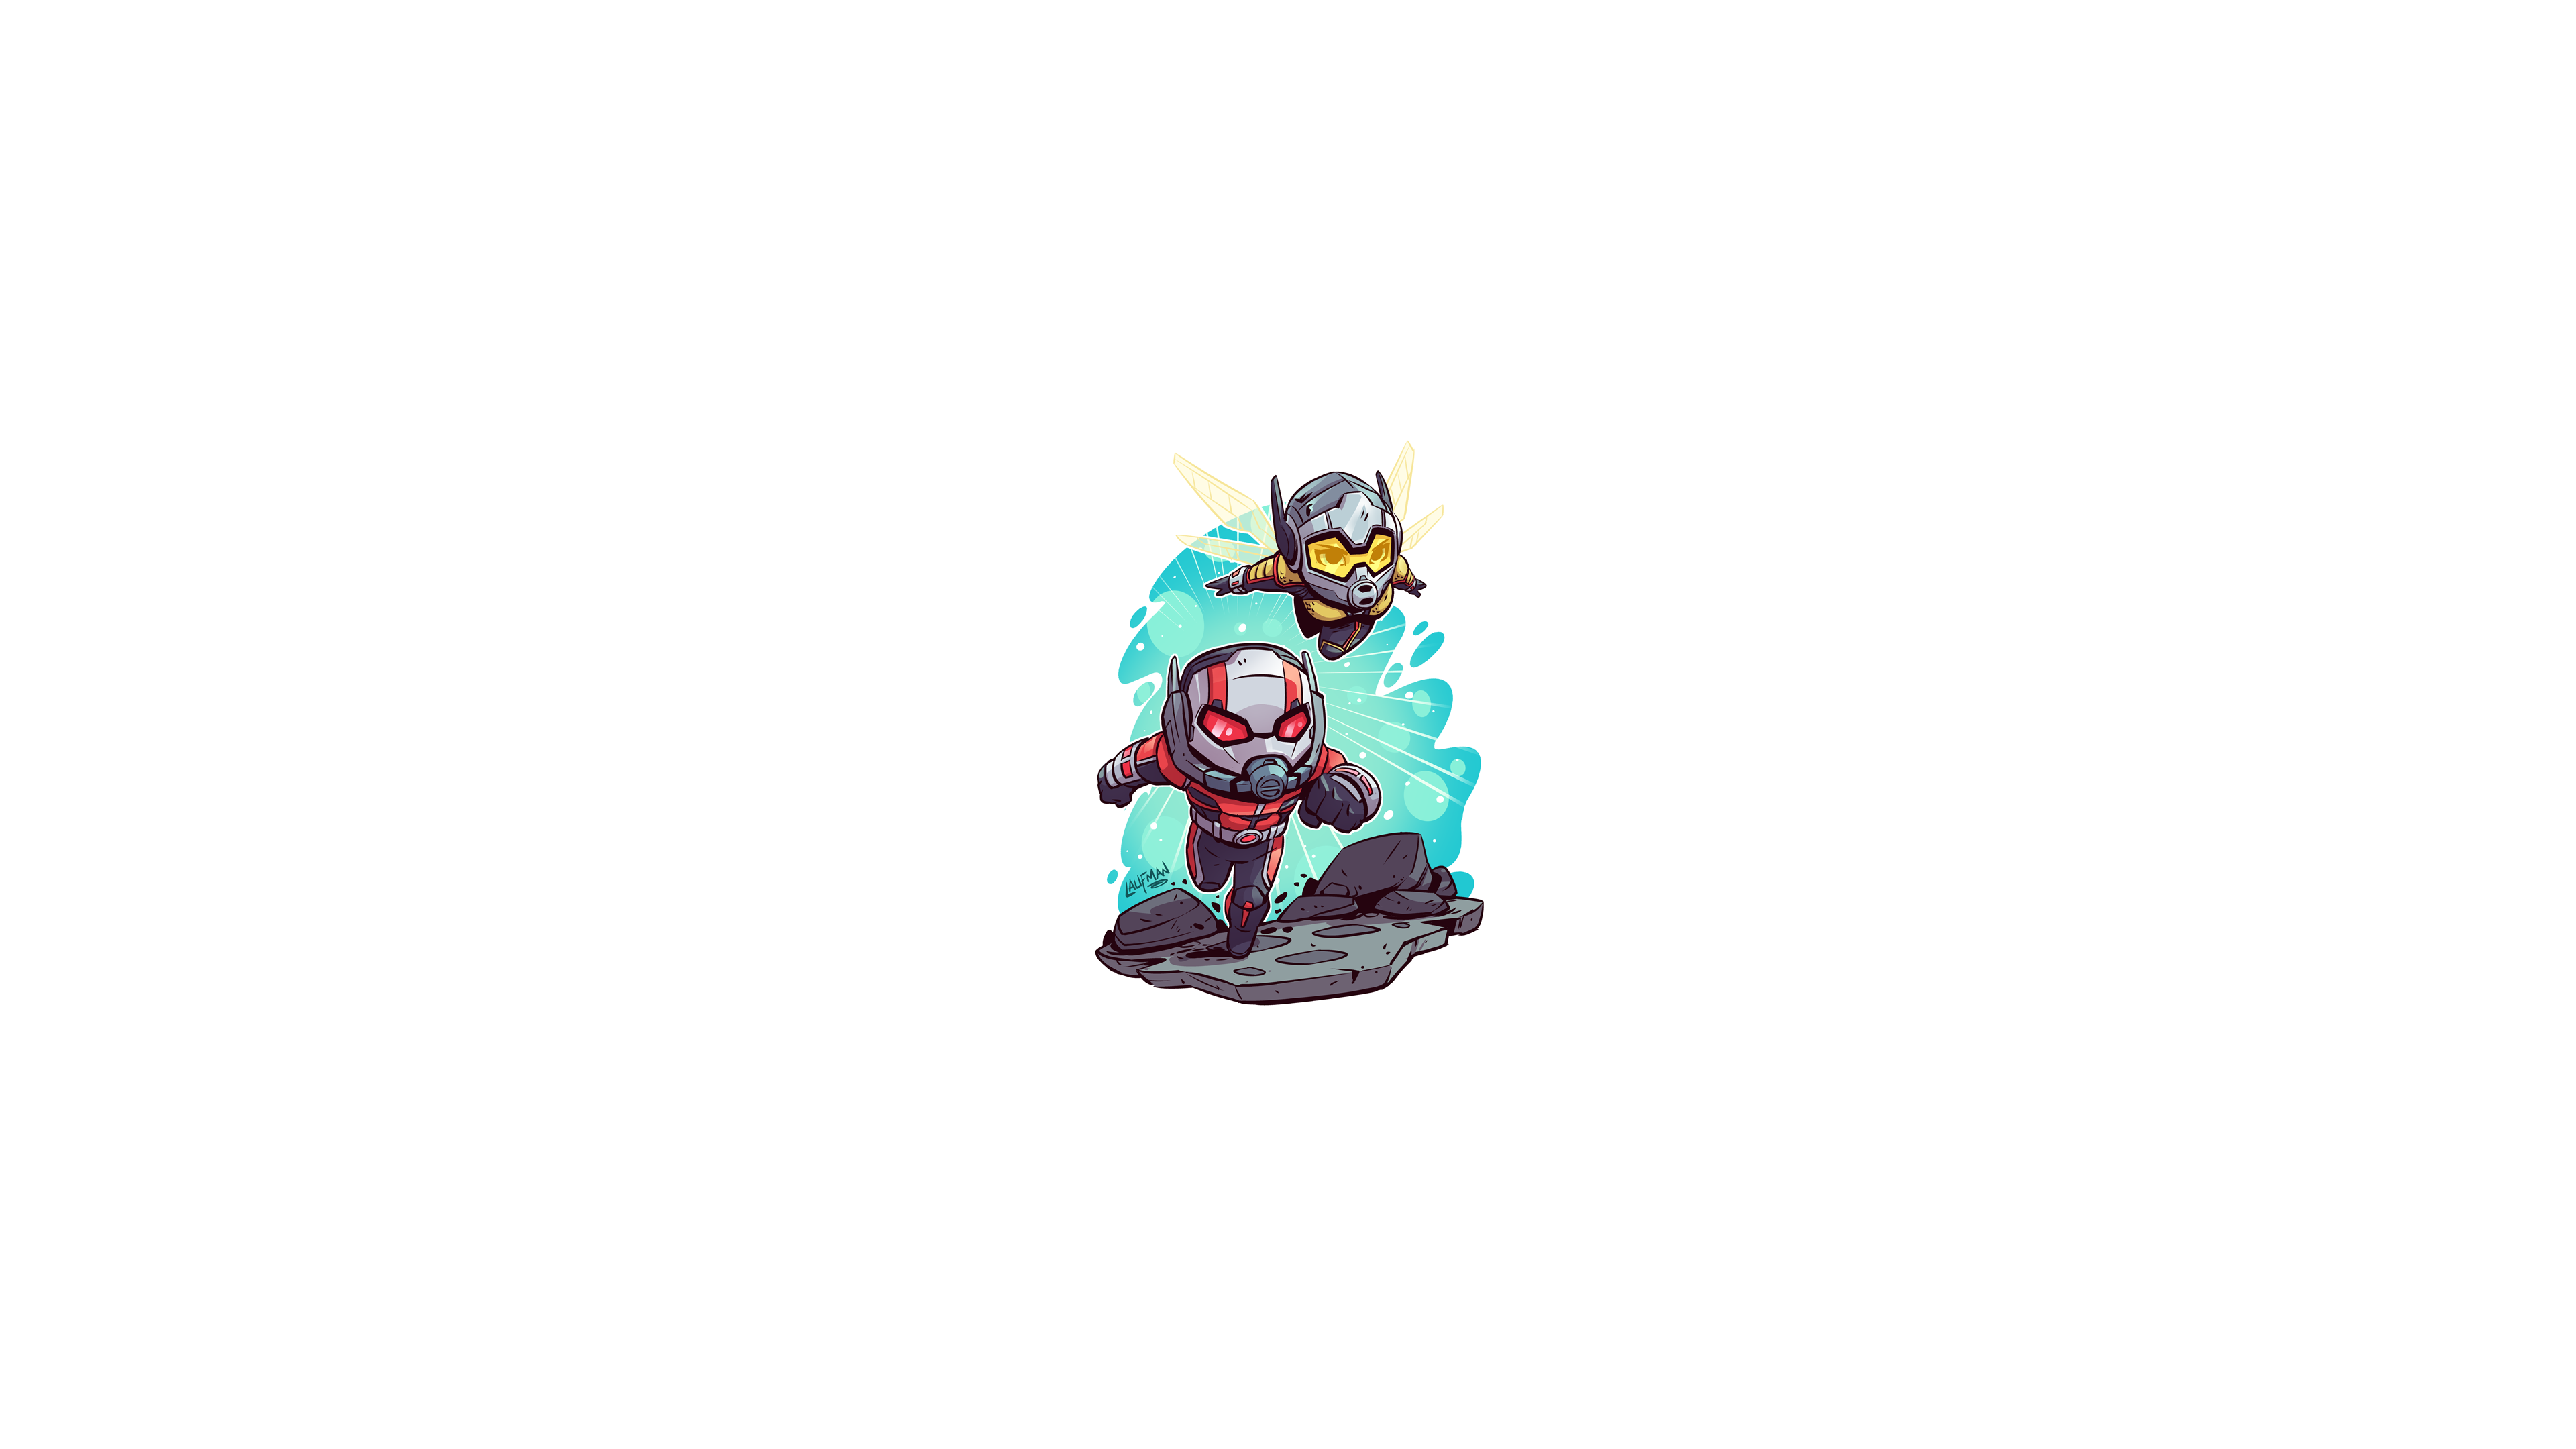 Ant Man The Wasp Ant Man And The Wasp Marvel Comics Hero Chibi Minimalism Marvel Heroes Marvel Super Wallpaper:3840x2160